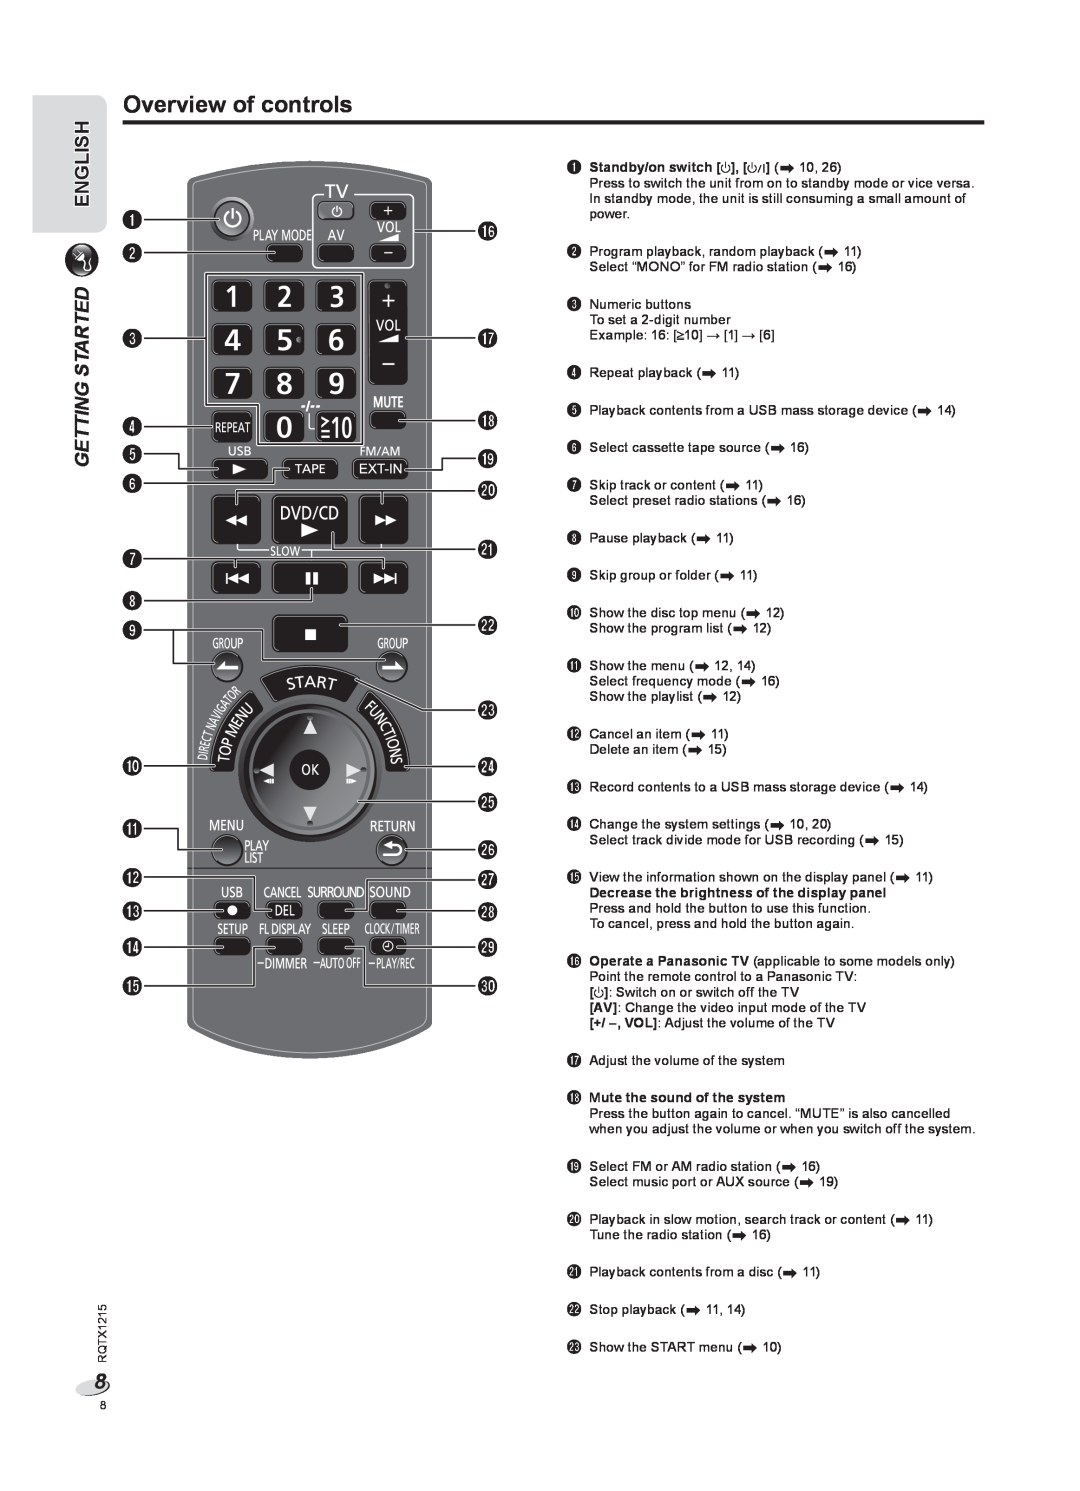 Panasonic SC-VKX60 operating instructions Overview of controls, English, Getting Started, AStandby/on switch `, 1 Z 